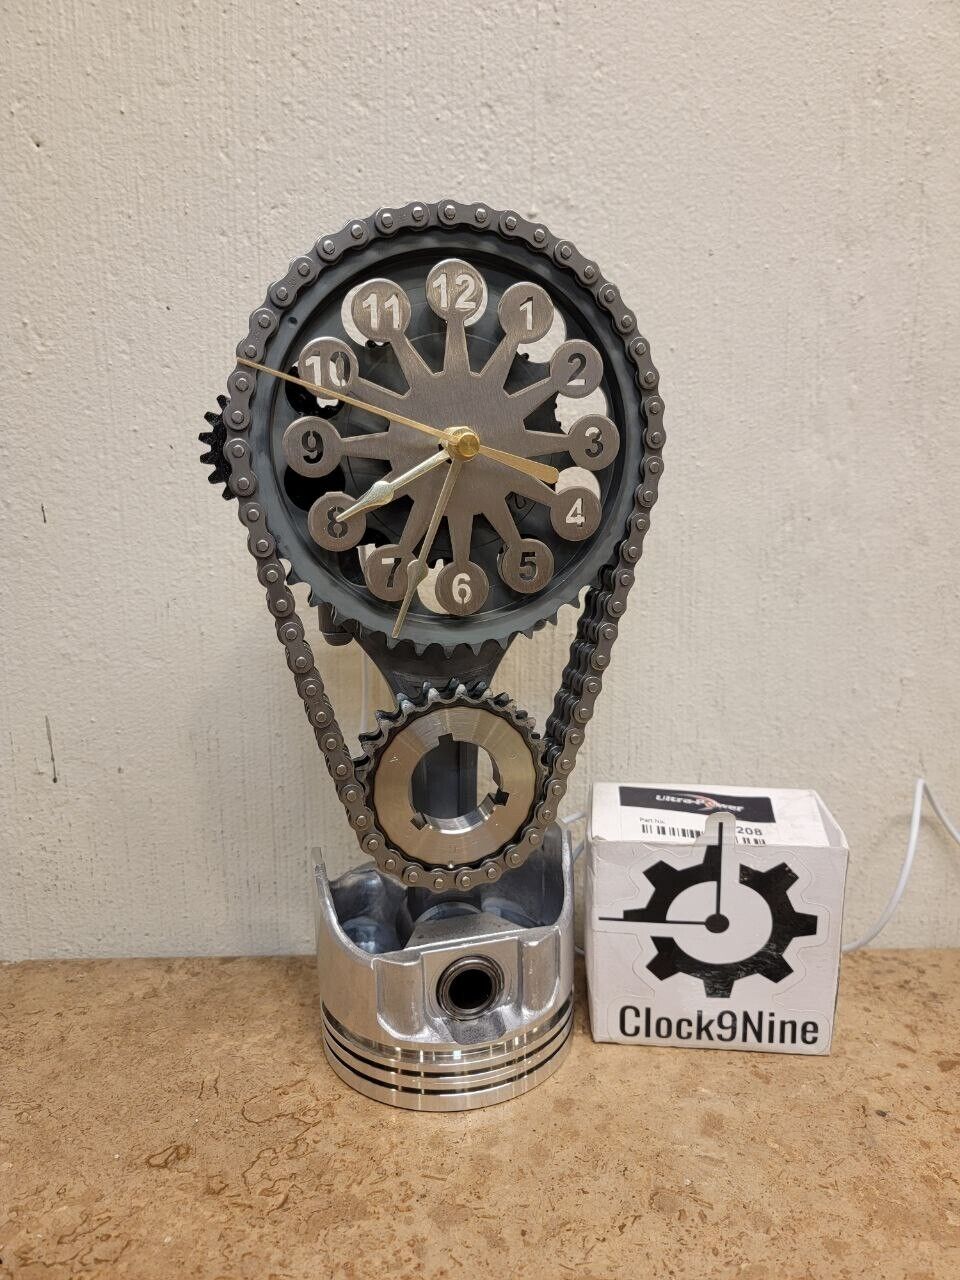 Stainless Steel Face Chevy Small block Timing Chain Clock, Motorized, Rotating.